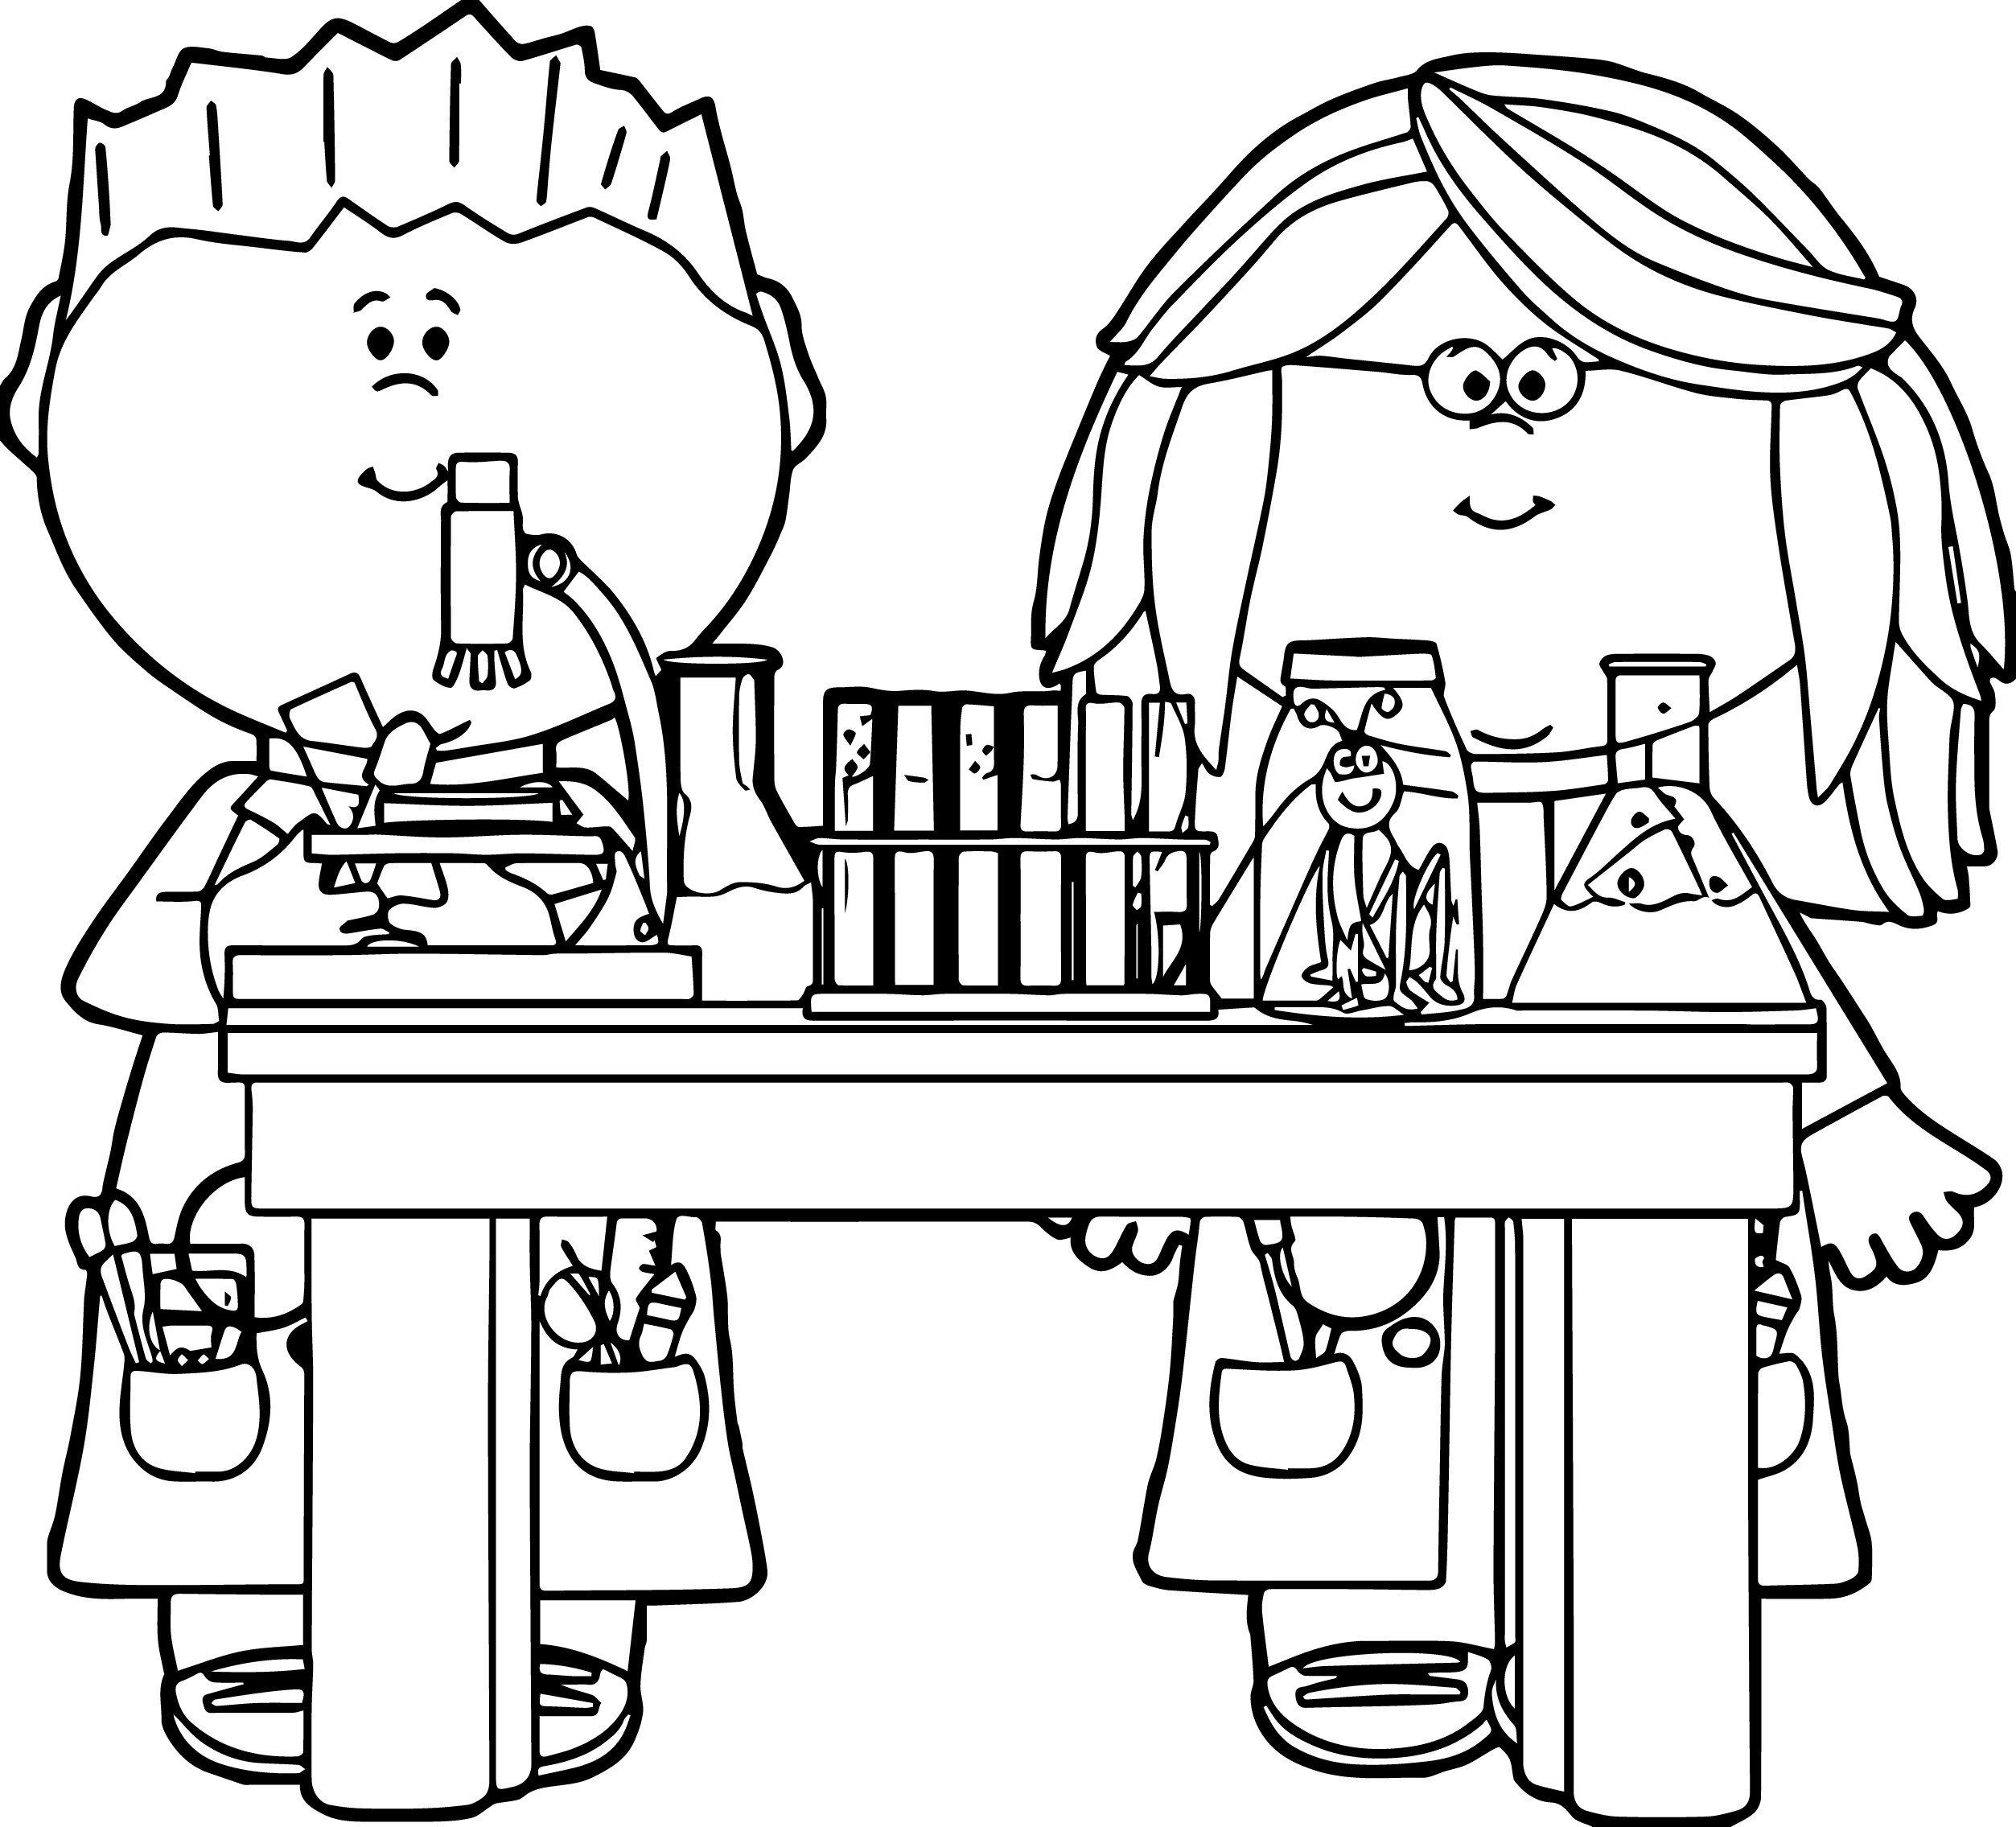 Science Coloring Pages For Kids at GetDrawings Free download